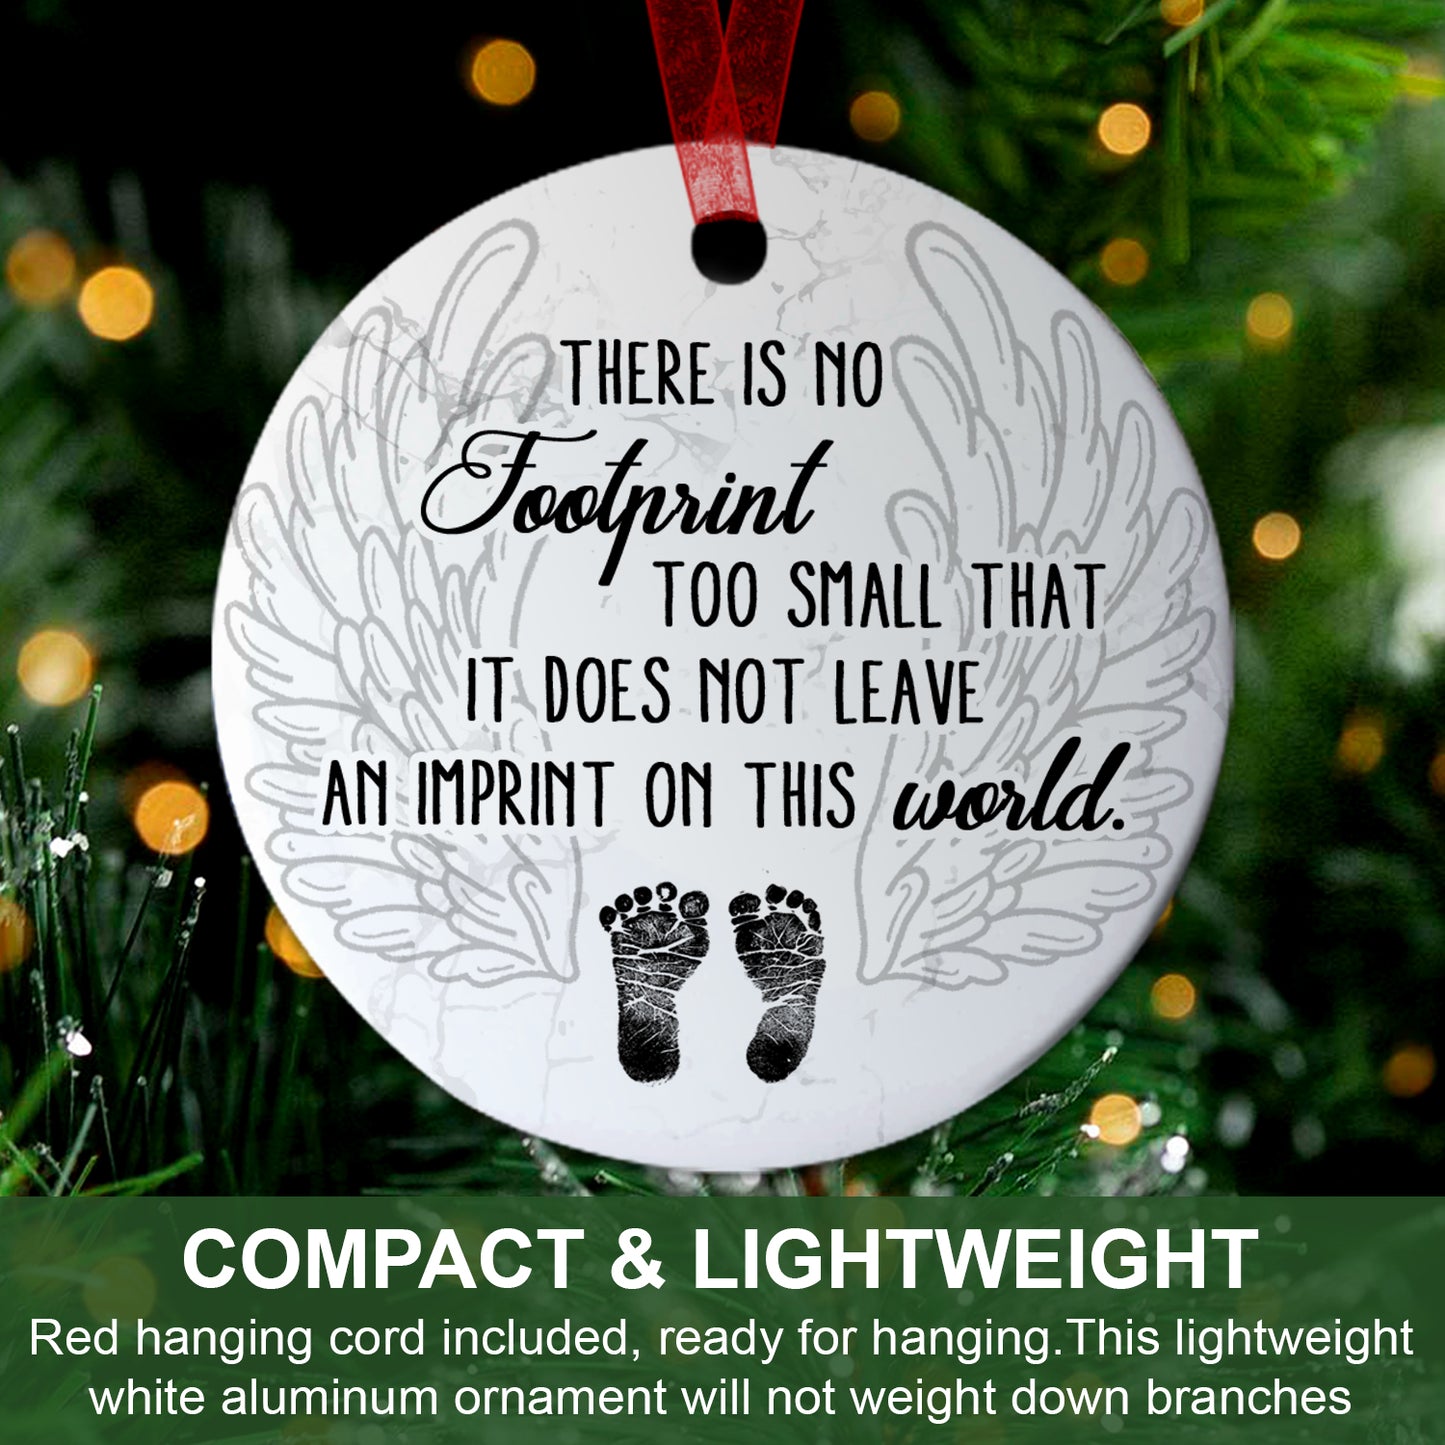 Memorial Ornament Gift for Loss of Baby, Small Footprint Not Leave an Imprint Ornament Keepsake Gifts for Miscarriage, Infant- Aluminum Metal Ornament